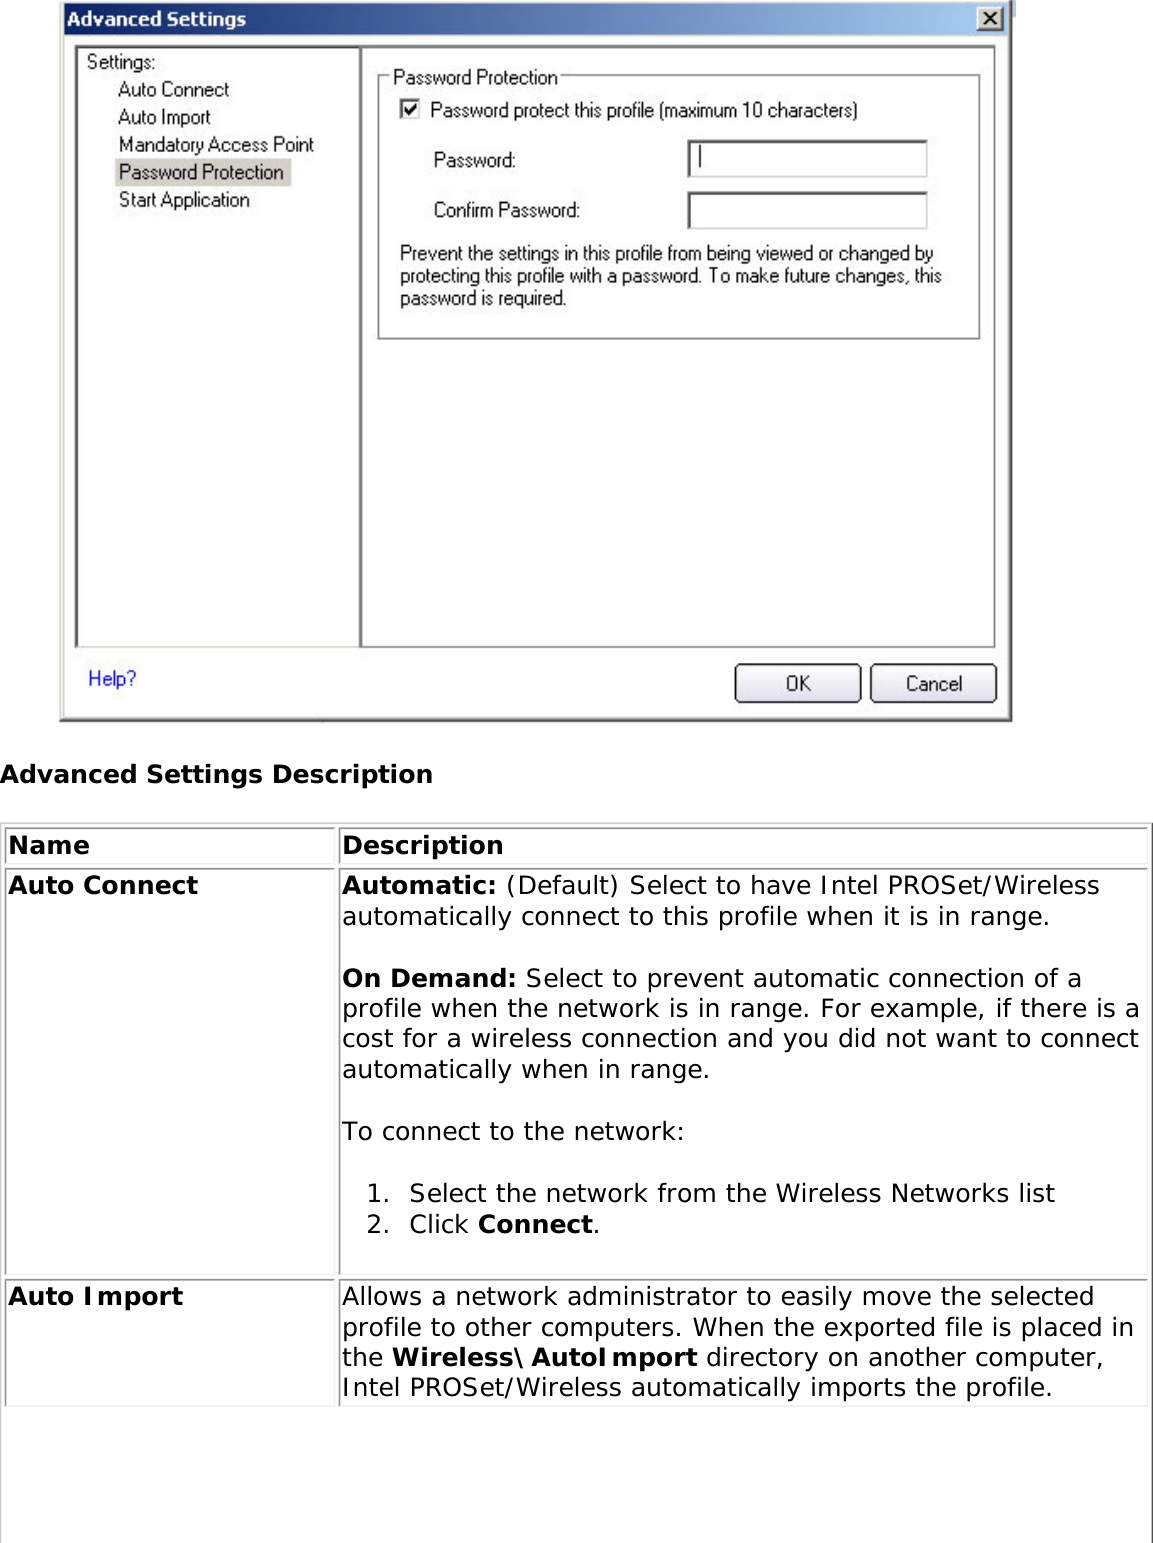  Advanced Settings DescriptionName DescriptionAuto Connect Automatic: (Default) Select to have Intel PROSet/Wireless automatically connect to this profile when it is in range. On Demand: Select to prevent automatic connection of a profile when the network is in range. For example, if there is a cost for a wireless connection and you did not want to connect automatically when in range. To connect to the network: 1.  Select the network from the Wireless Networks list2.  Click Connect. Auto Import  Allows a network administrator to easily move the selected profile to other computers. When the exported file is placed in the Wireless\AutoImport directory on another computer, Intel PROSet/Wireless automatically imports the profile. 